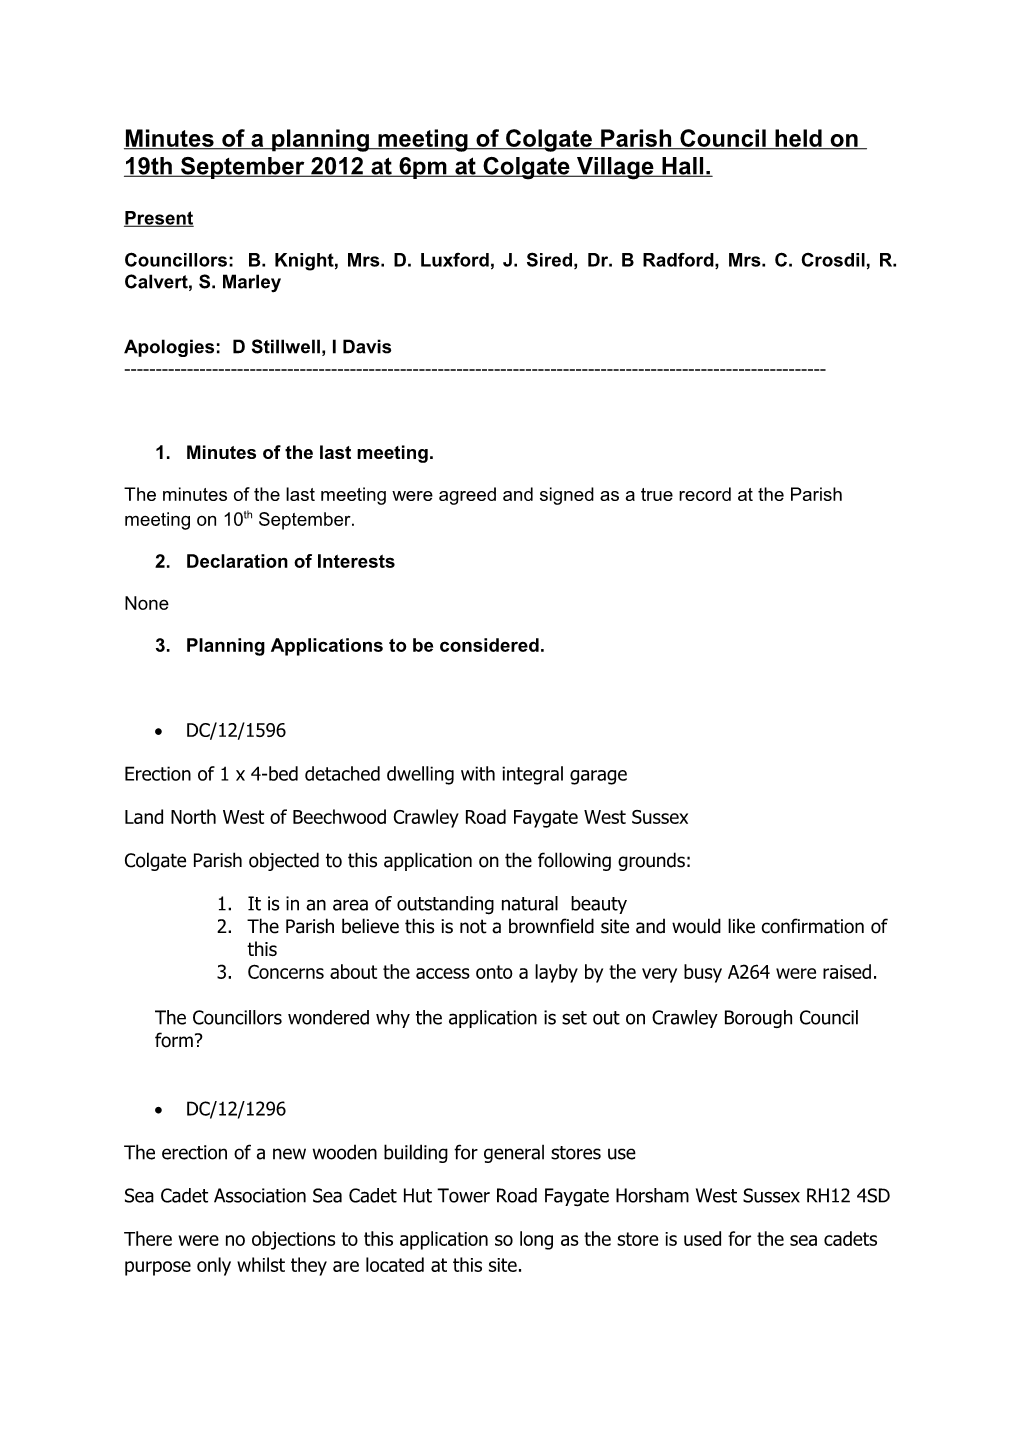 Minutes of a Meeting of South Heighton Parish Council